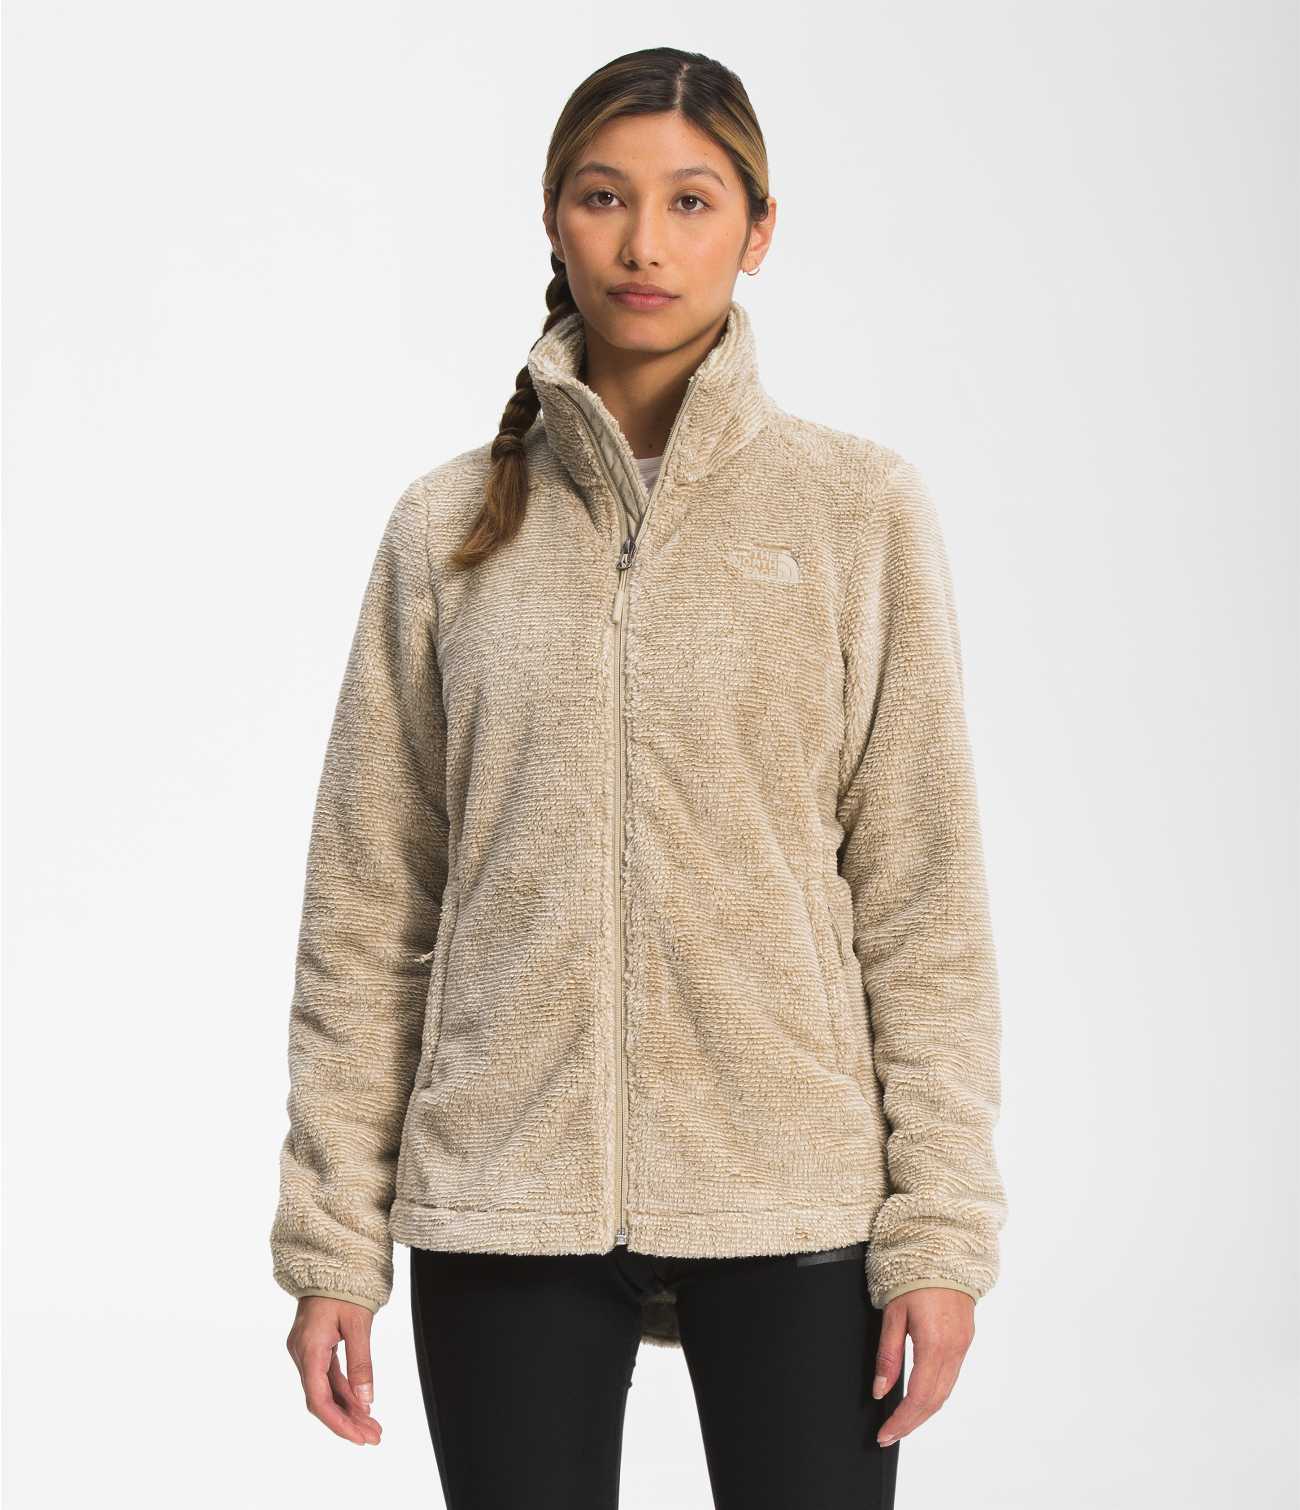 Women's The North Face Osito Full-Zip Jacket